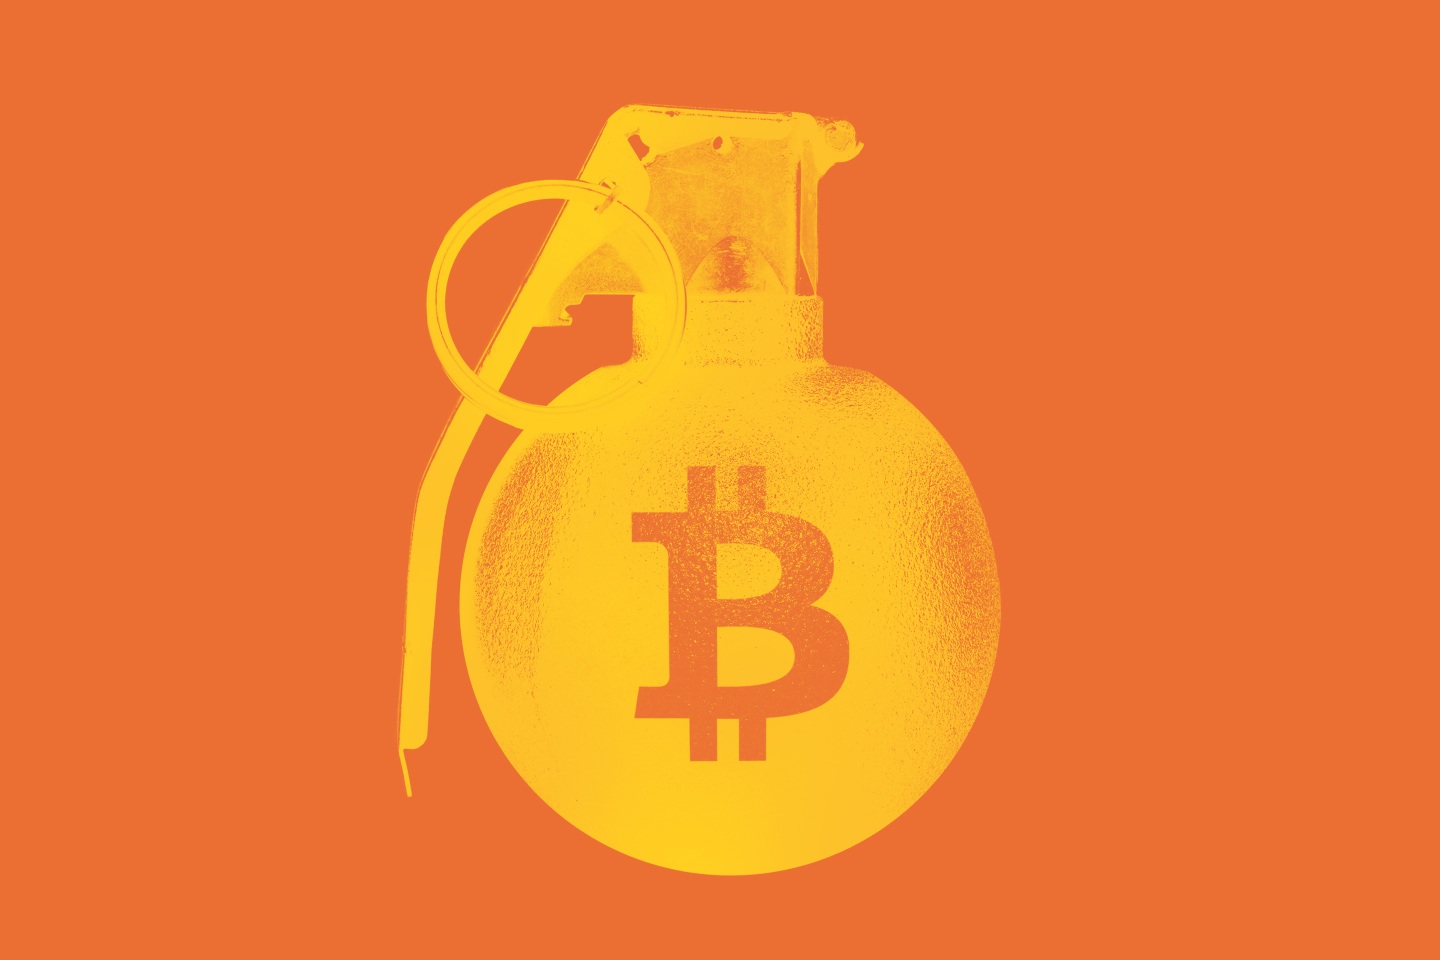 A grenade styled with the Bitcoin logo.